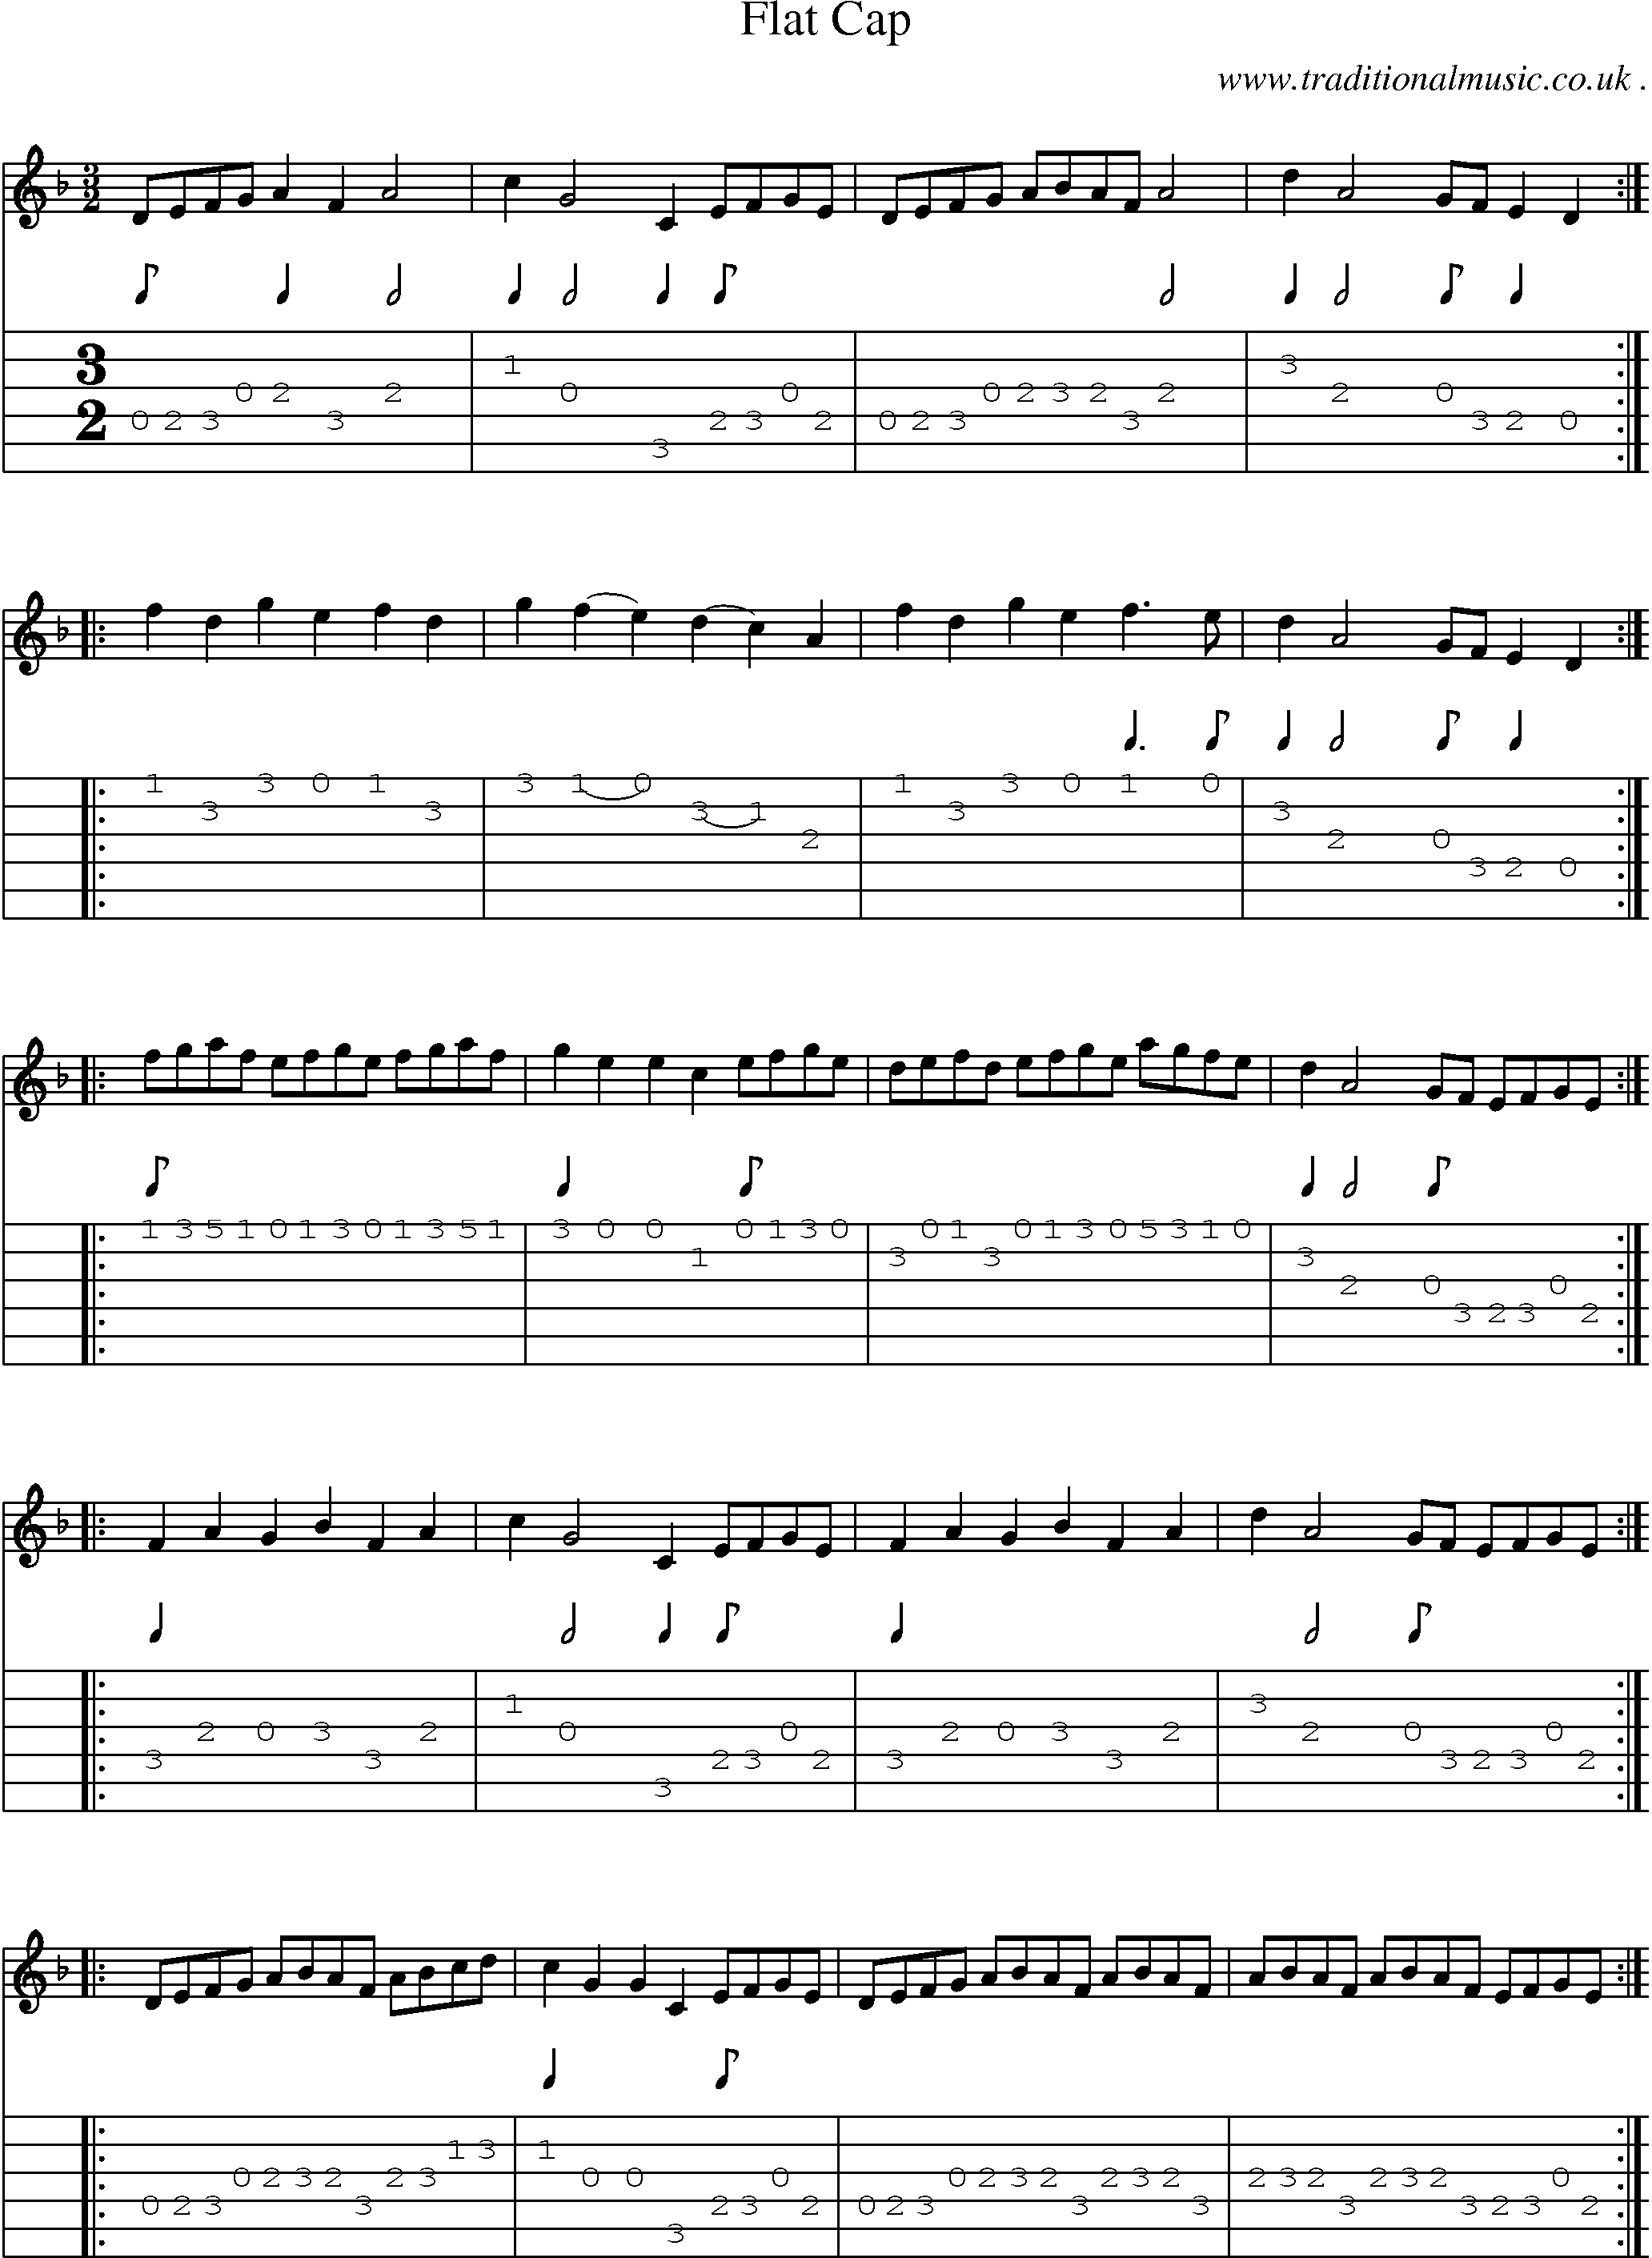 Sheet-Music and Guitar Tabs for Flat Cap